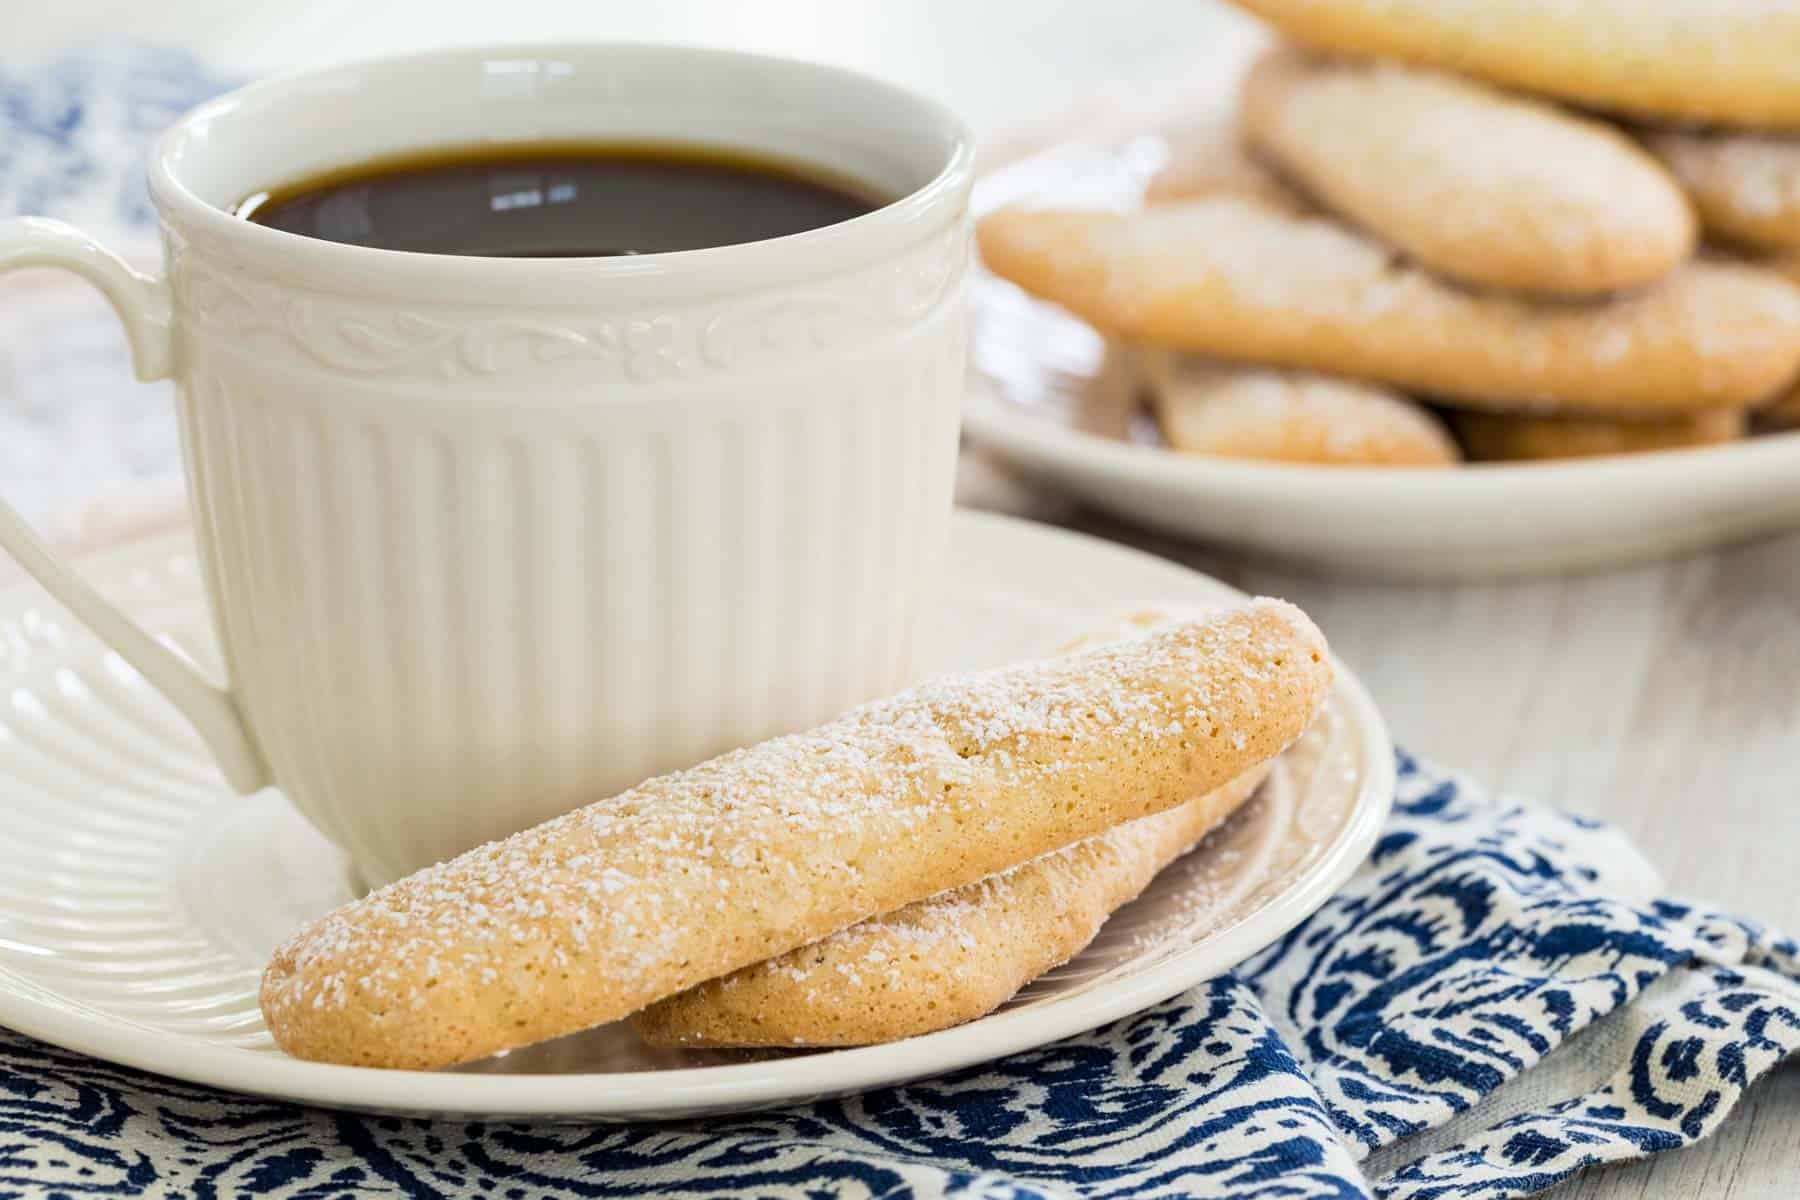 Two gluten free ladyfingers on a saucer next to a cup of coffee, with a plate of ladyfingers in the background.